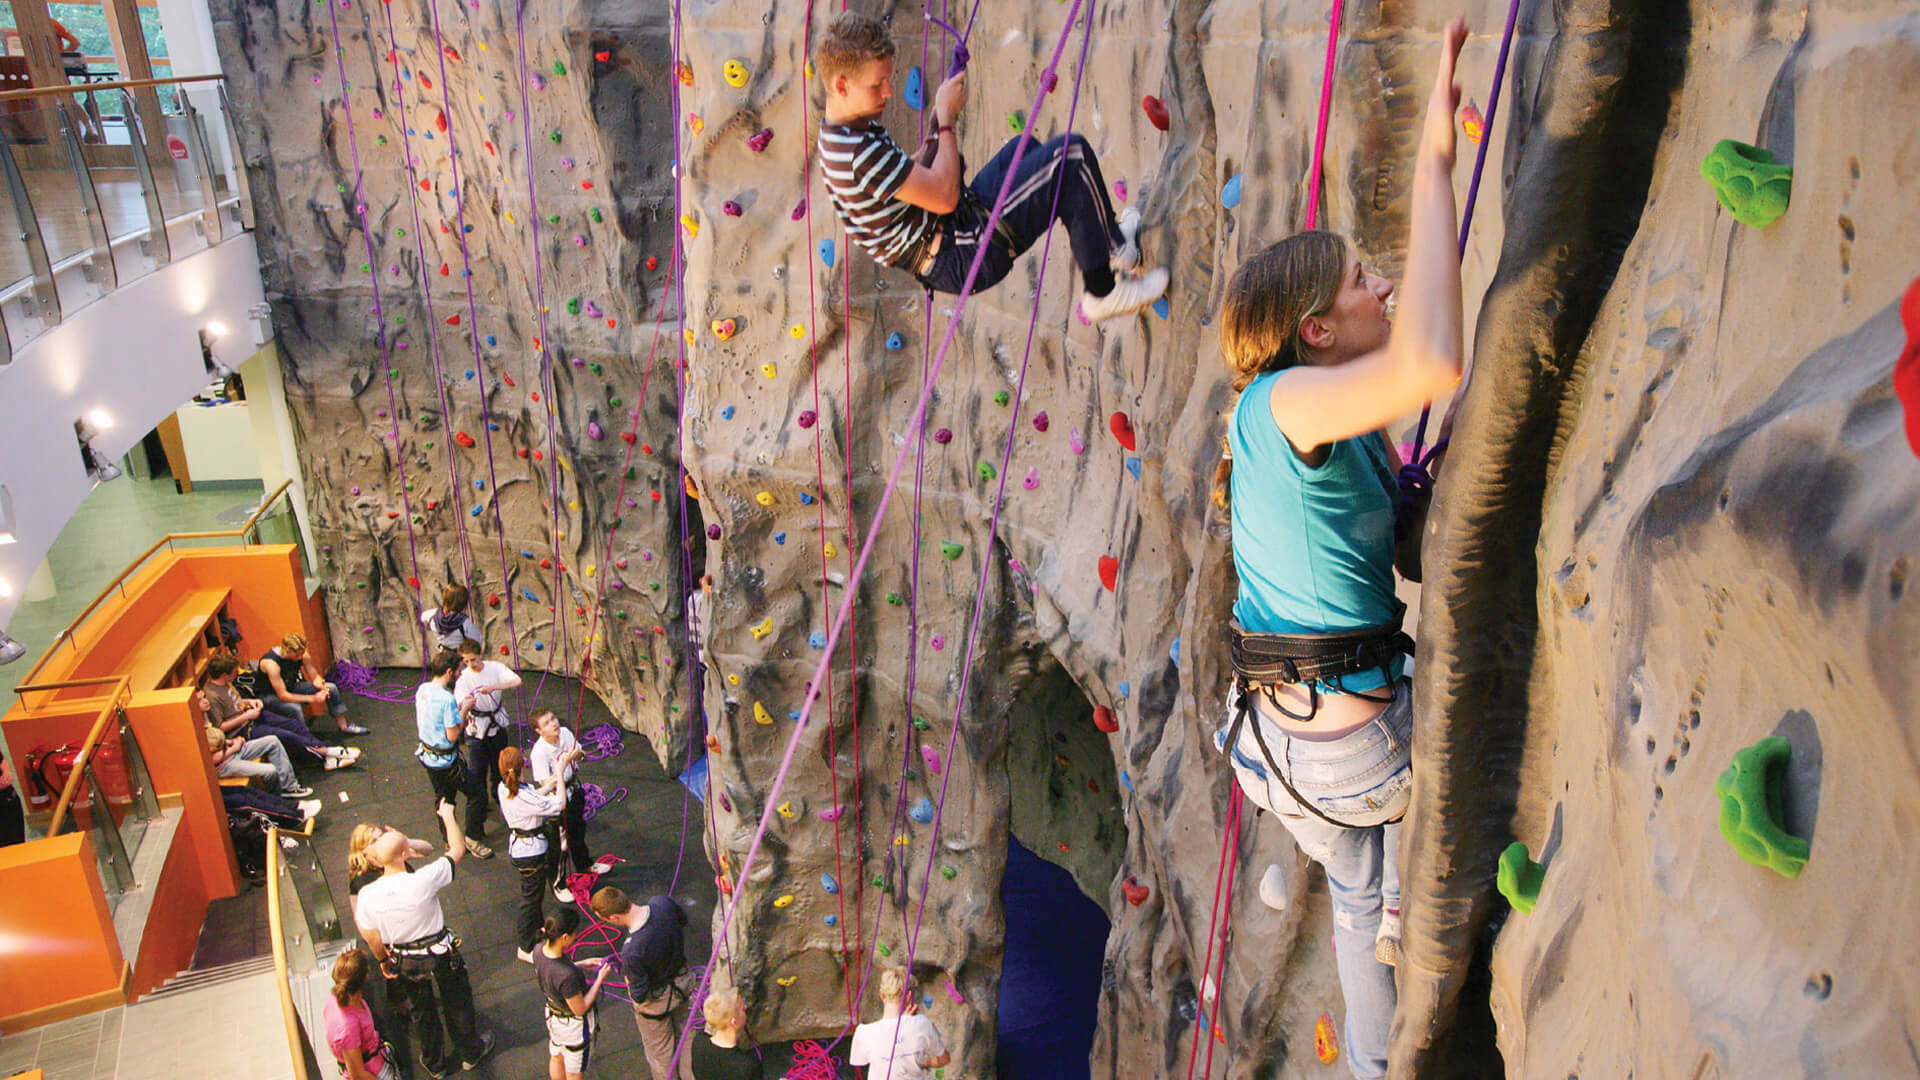 Students using the on-campus climbing wall at Queen's University Belfast